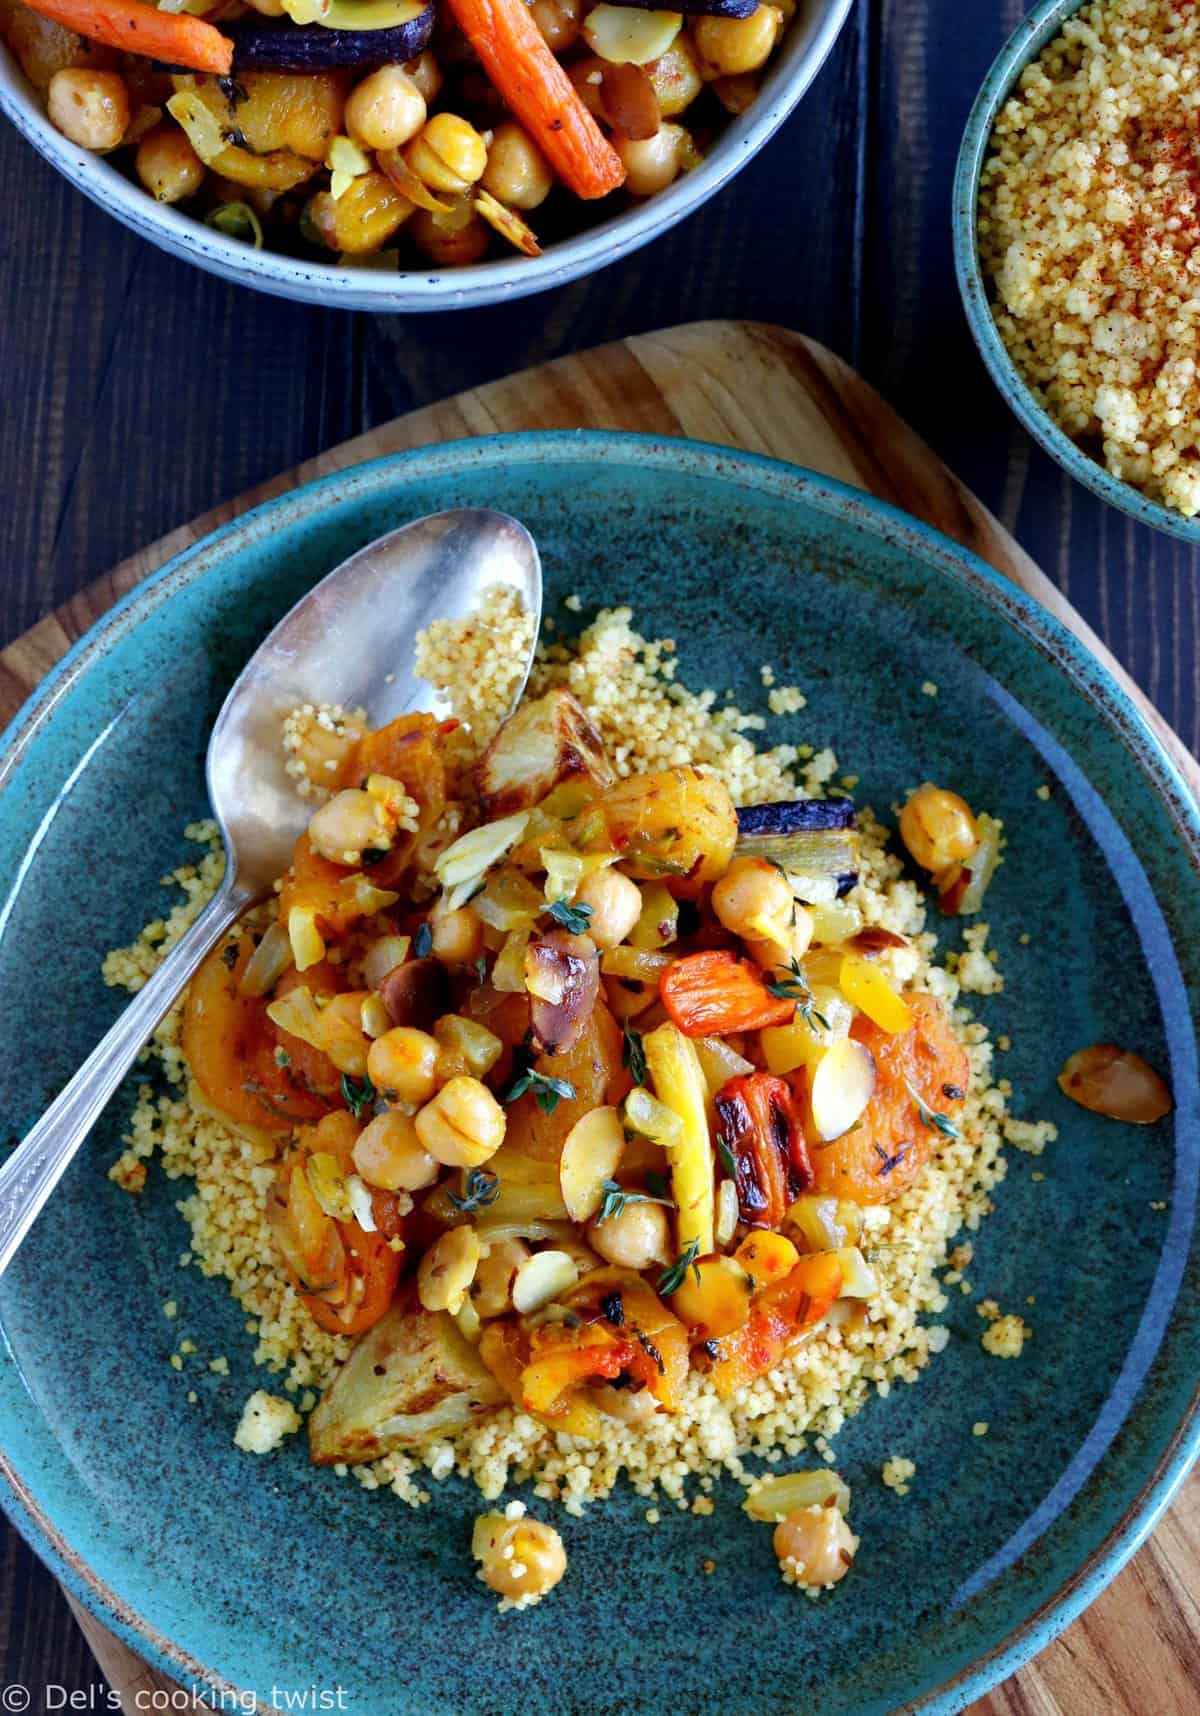 Family Size - Apricot & Chickpea Tagine - Wildly Tasty